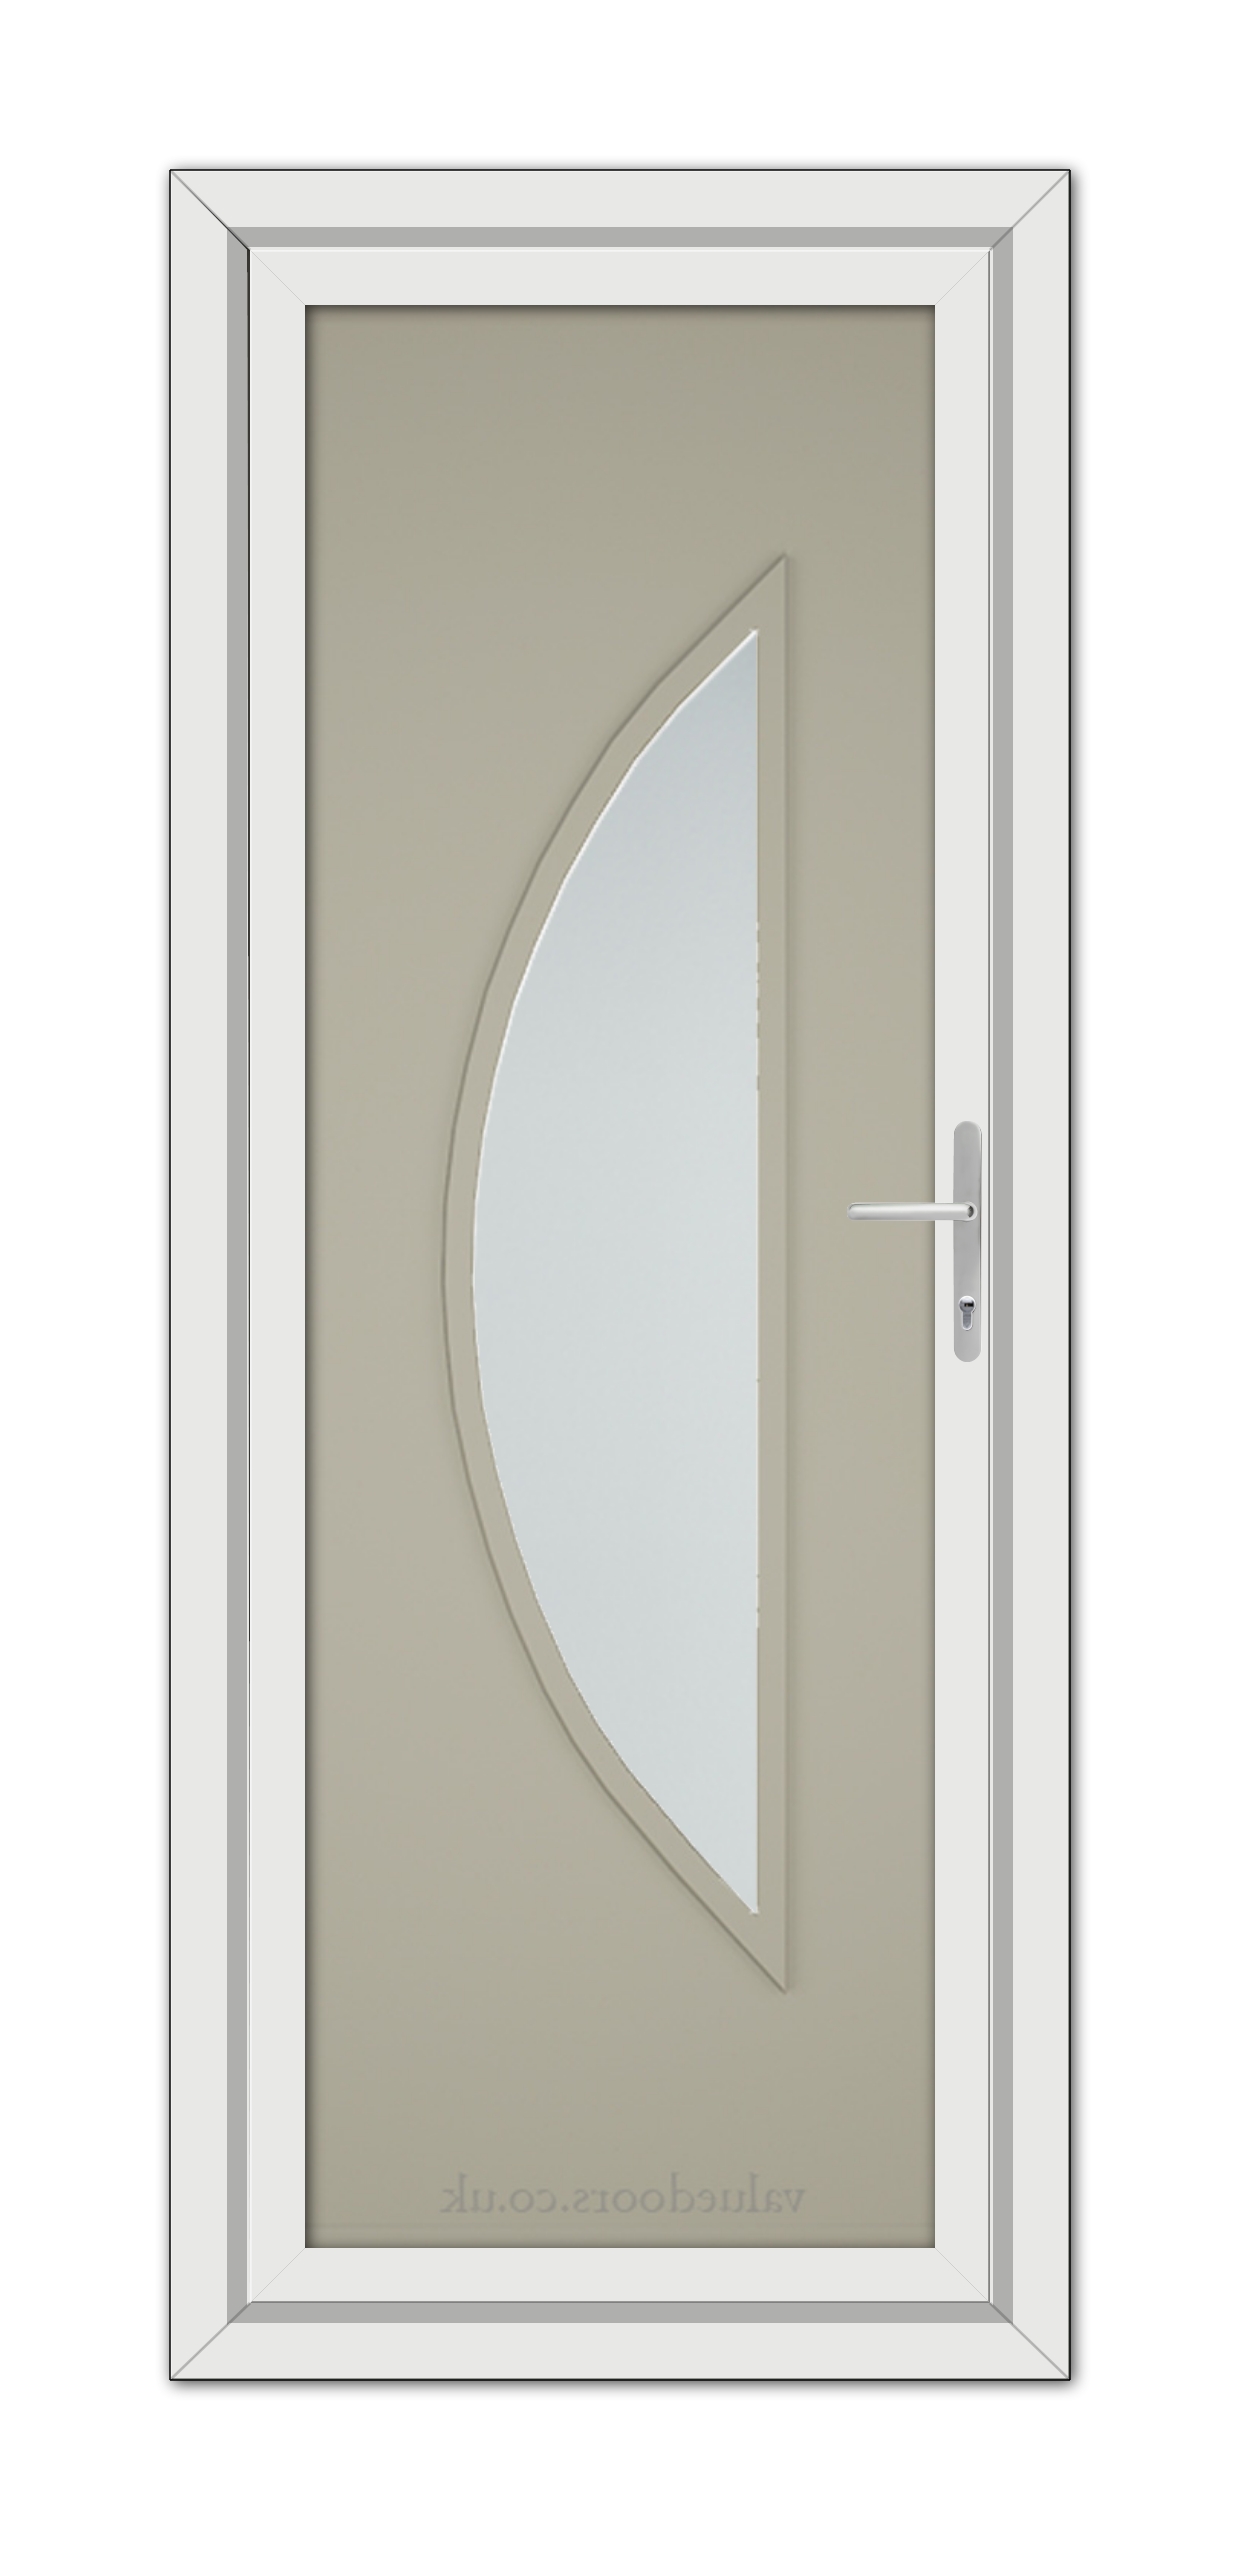 A Pebble Grey Modern 5051 uPVC Door featuring an opaque glass panel shaped like a stylized leaf, complete with a sleek handle on the right side.